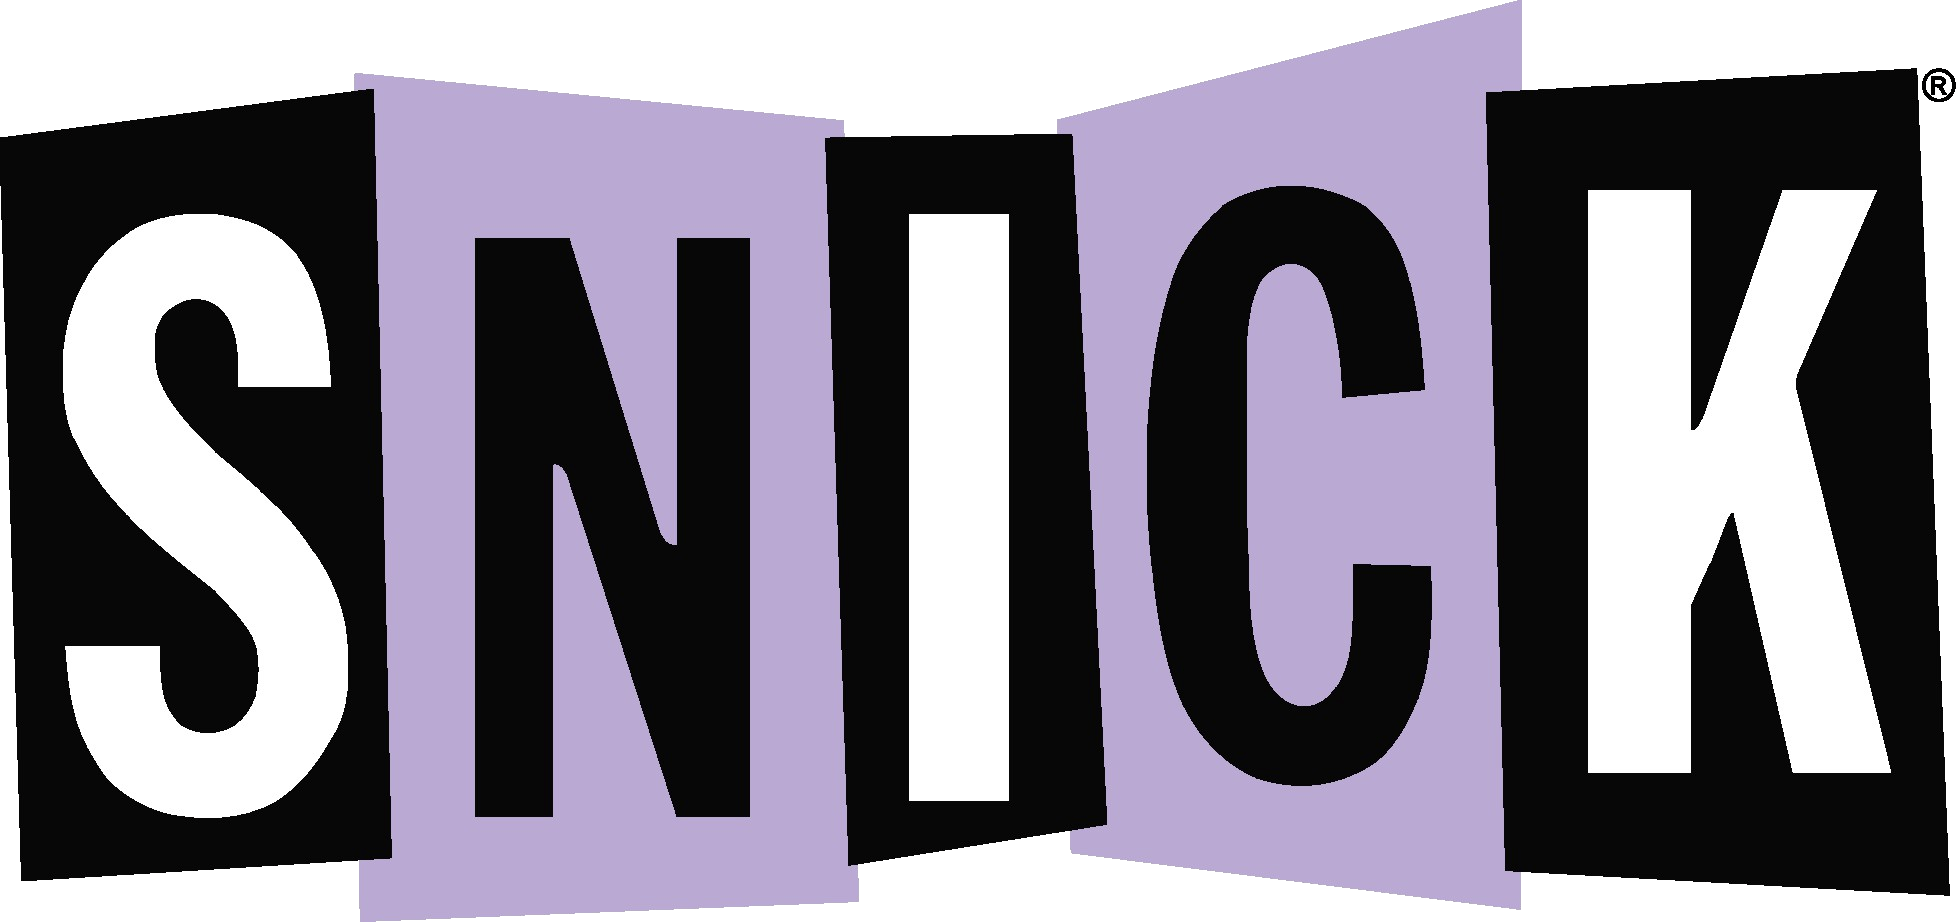 Old TeenNick Logo - SNICK